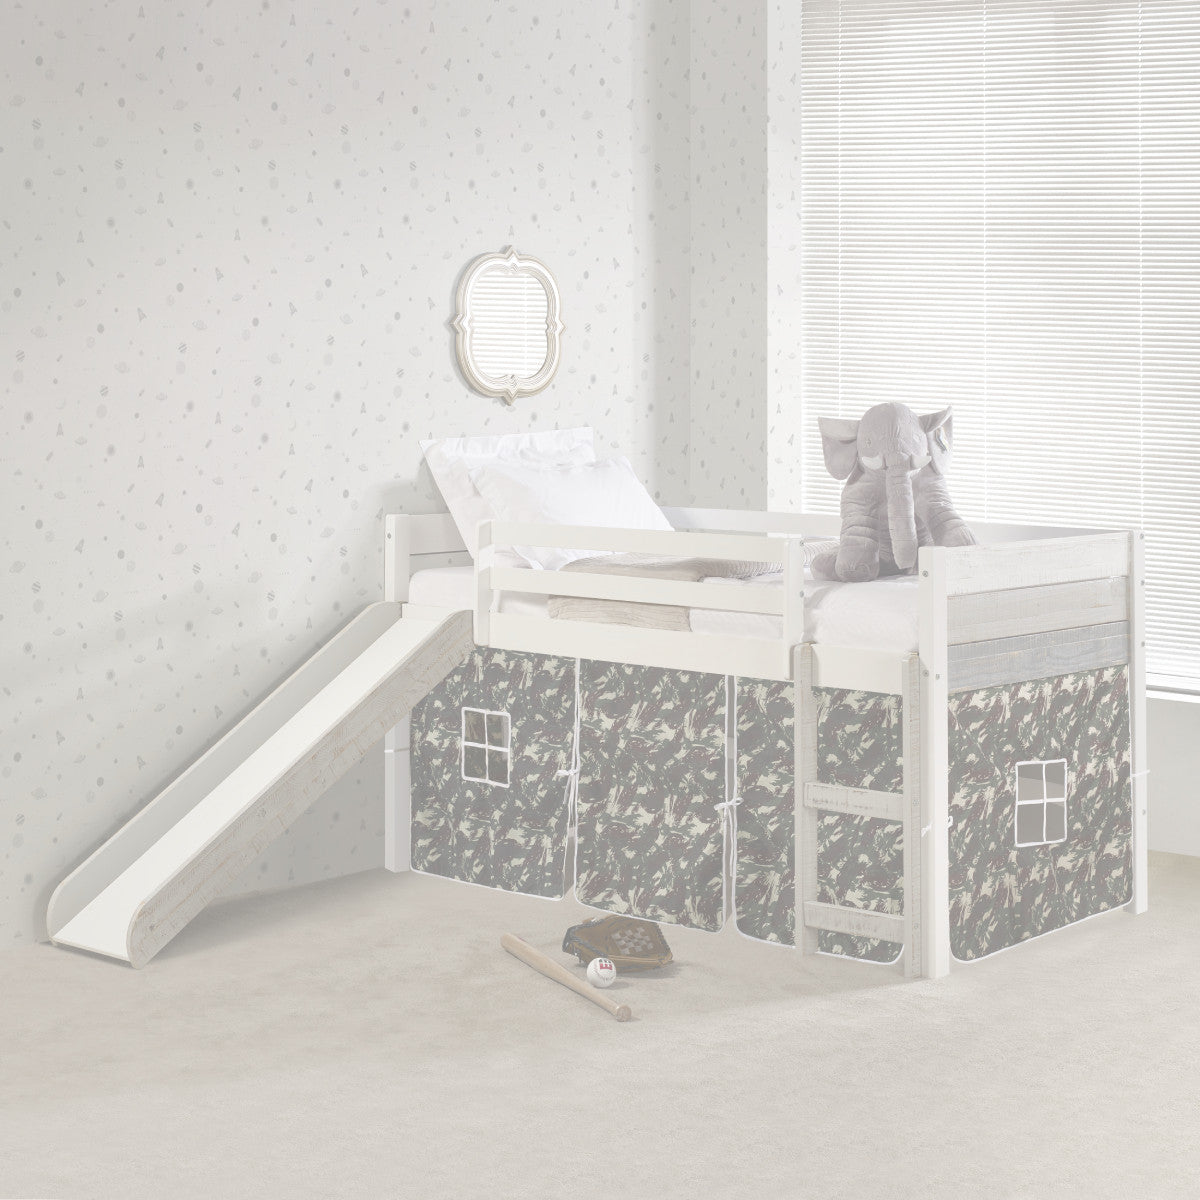 TWIN PANEL LOW LOFT BED WITH SLIDE IN TWO-TONE GREY/WHITE FINISH & CAMO TENT KIT